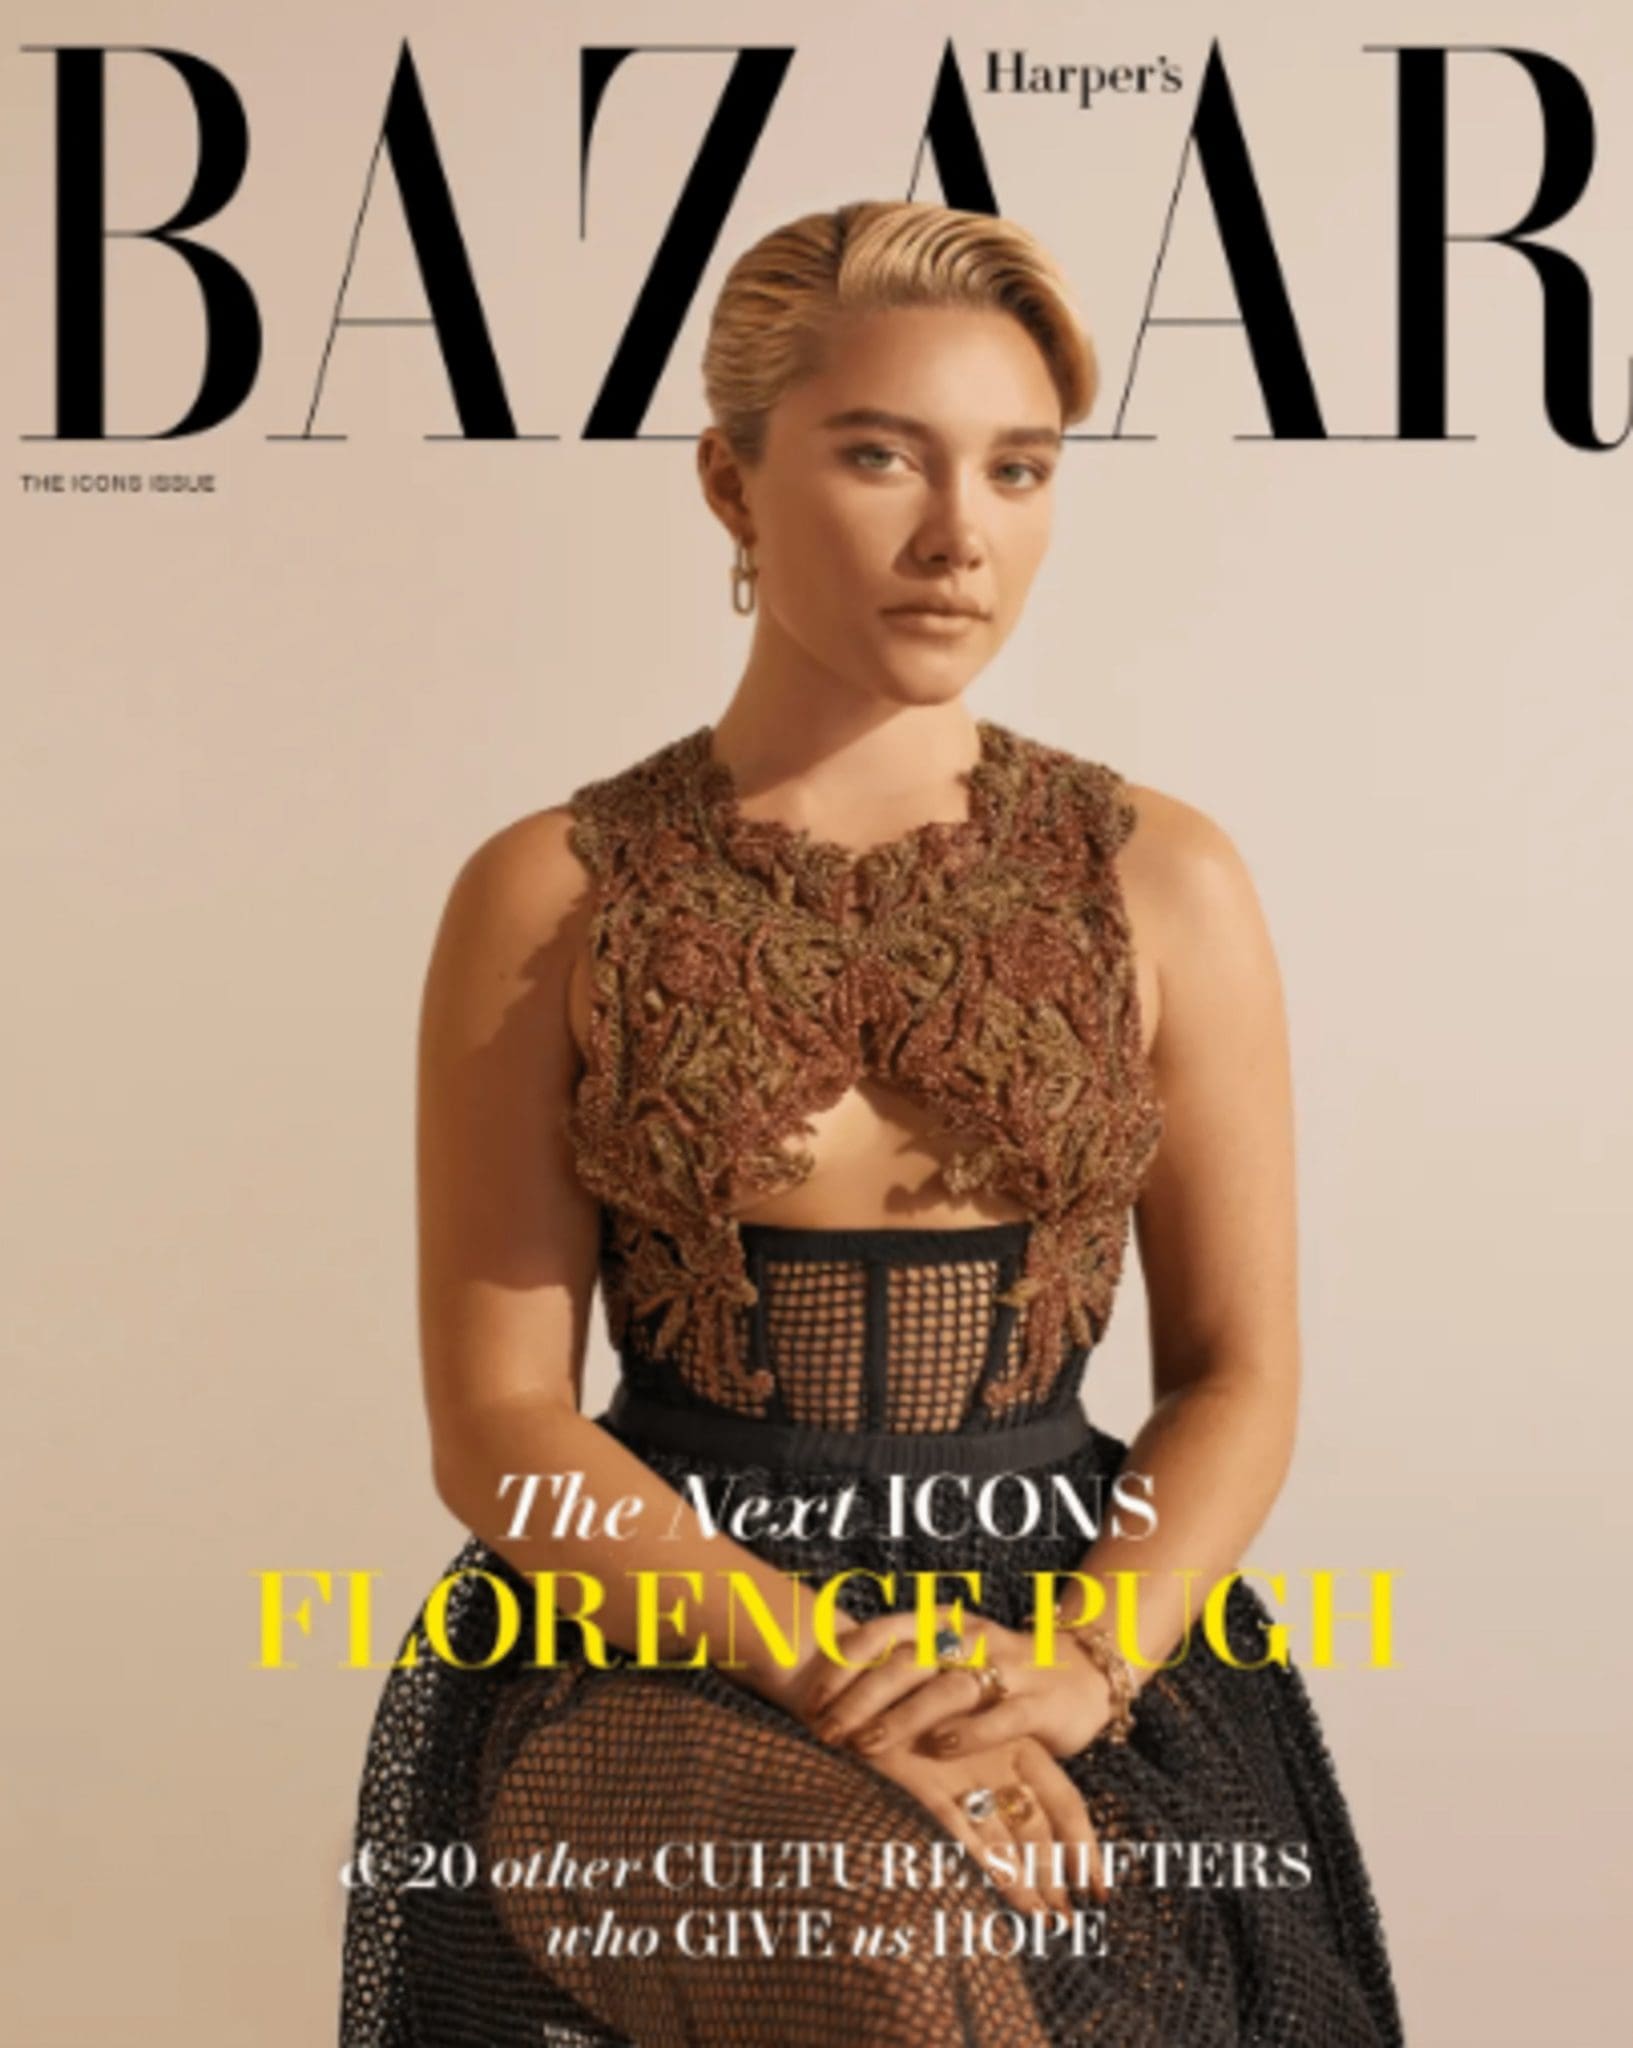 In A Recent Interview, Florence Pugh Talked About Her Widely Shared Sheer Valentino Gown And The Comments It Prompted Regarding Her Breasts